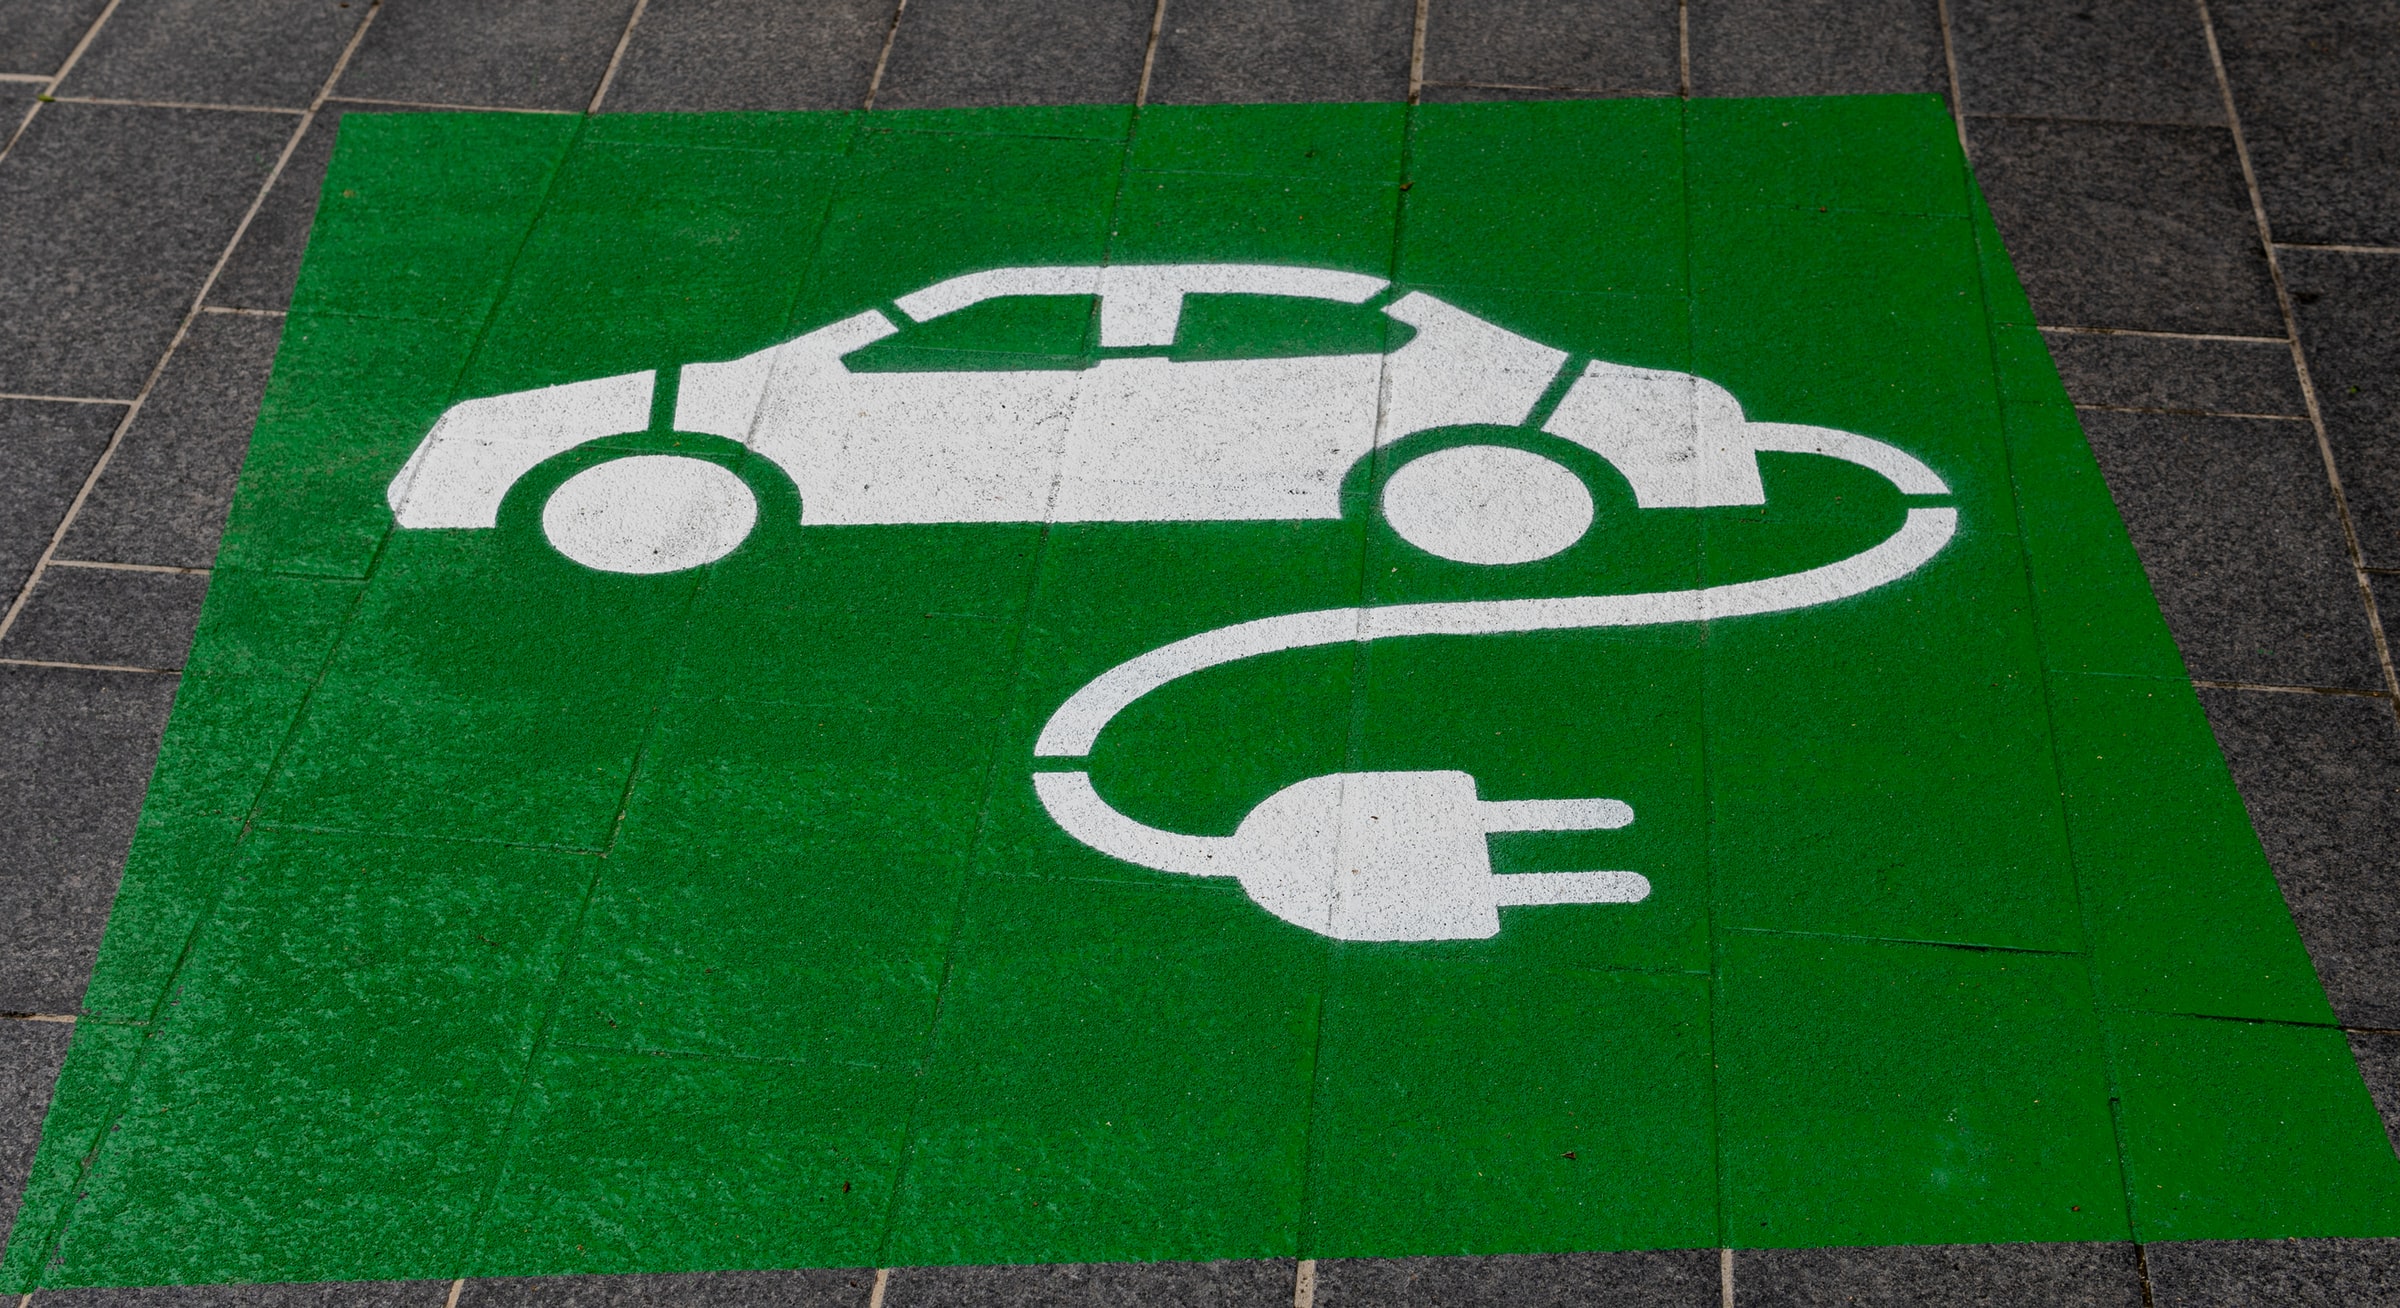 Charging Station sign: Increased investments in EV charging technology will promote changes in built environment and the energy mix of transportation.  Photo by Michael Marais on Unsplash.